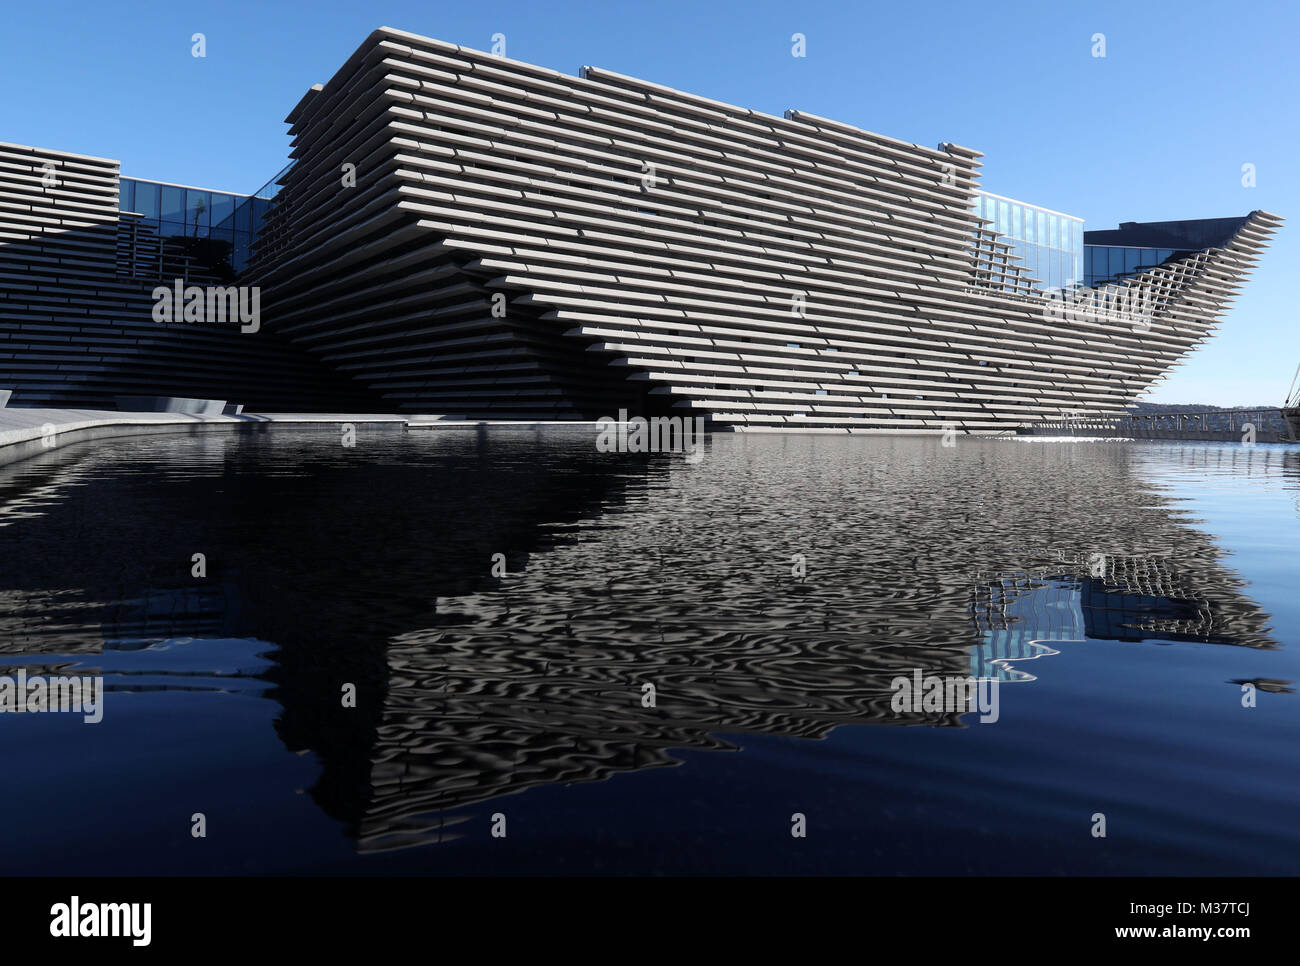 A general view of the finished exterior of the new eighty million pound V&A Dundee museum during a visit by Japanese architect Kengo Kuma(not pictured). The designer met workers as the focus moves to the interior of the V&A, fitting out gallery spaces, a cafe and a restaurant ahead of its opening in September. Stock Photo